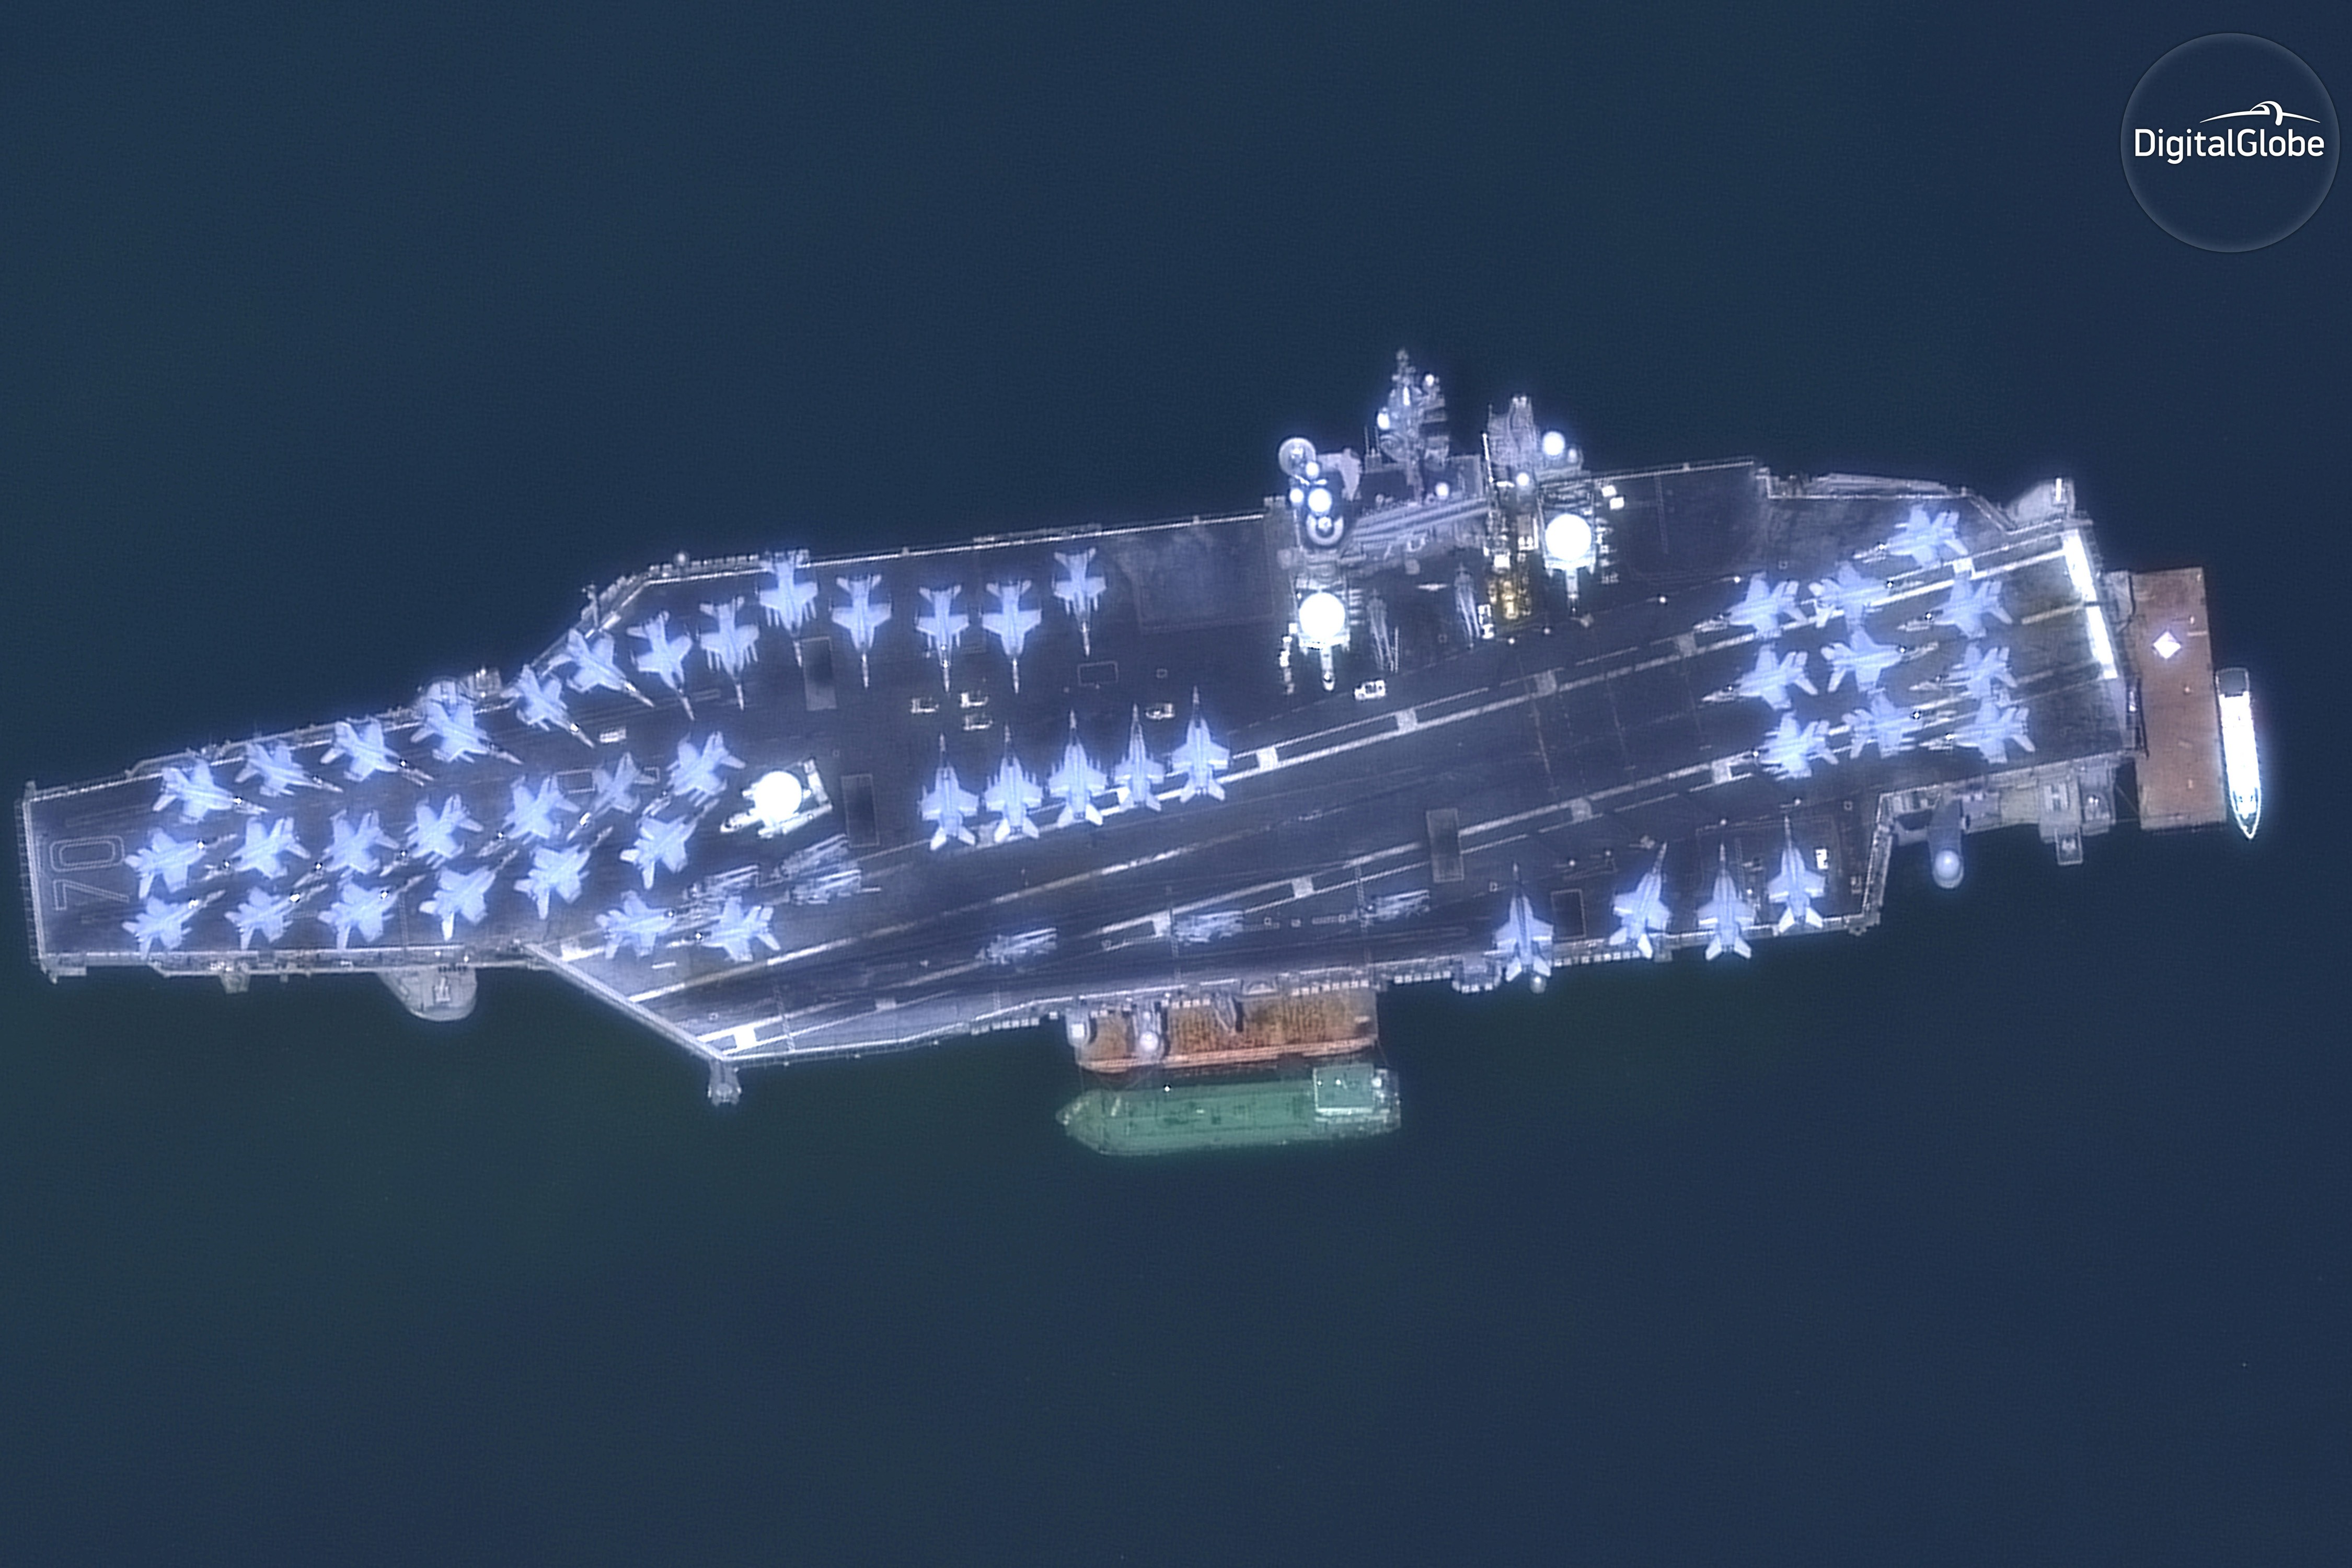 This March 6, 2018, satellite image provided by DigitalGlobe shows The USS Carl Vinson off the coast of Da Nang, Vietnam, its deck packed with warplanes. Photo: DigitalGlobe, a Maxar company via AP